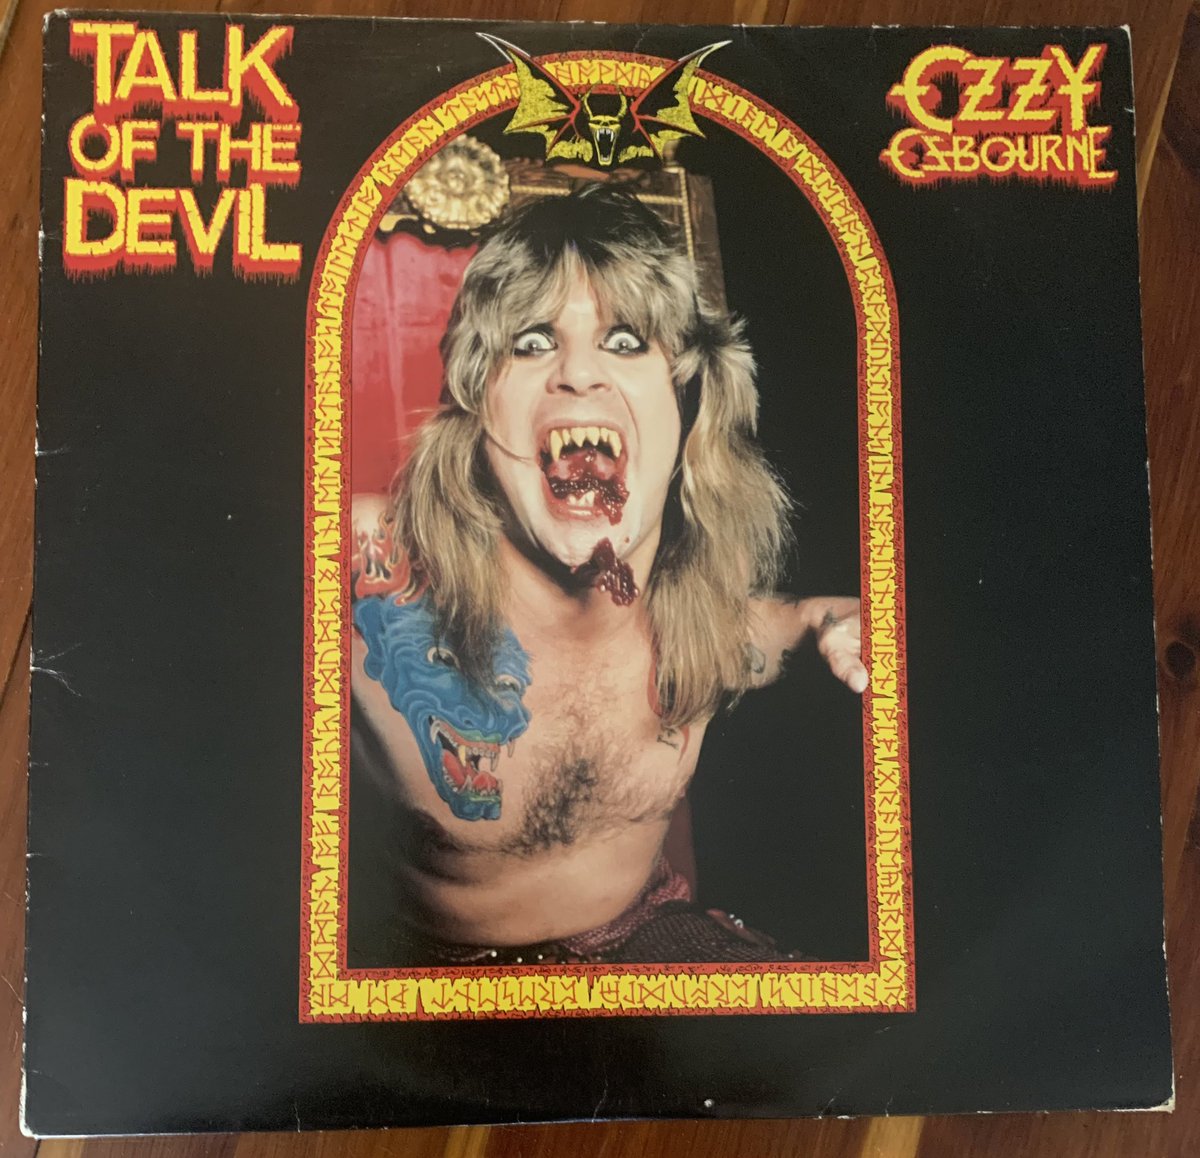 Something’s different about this one . . . Another groovy find for May’s shop, the UK version. Don’t see many of these in the states. 🤘🎸🎶😎 #chucklazaras #ozzyosbourne #blacksabbath #talkofthedevil #speakofthedevil #vinyl #records #recordcollection